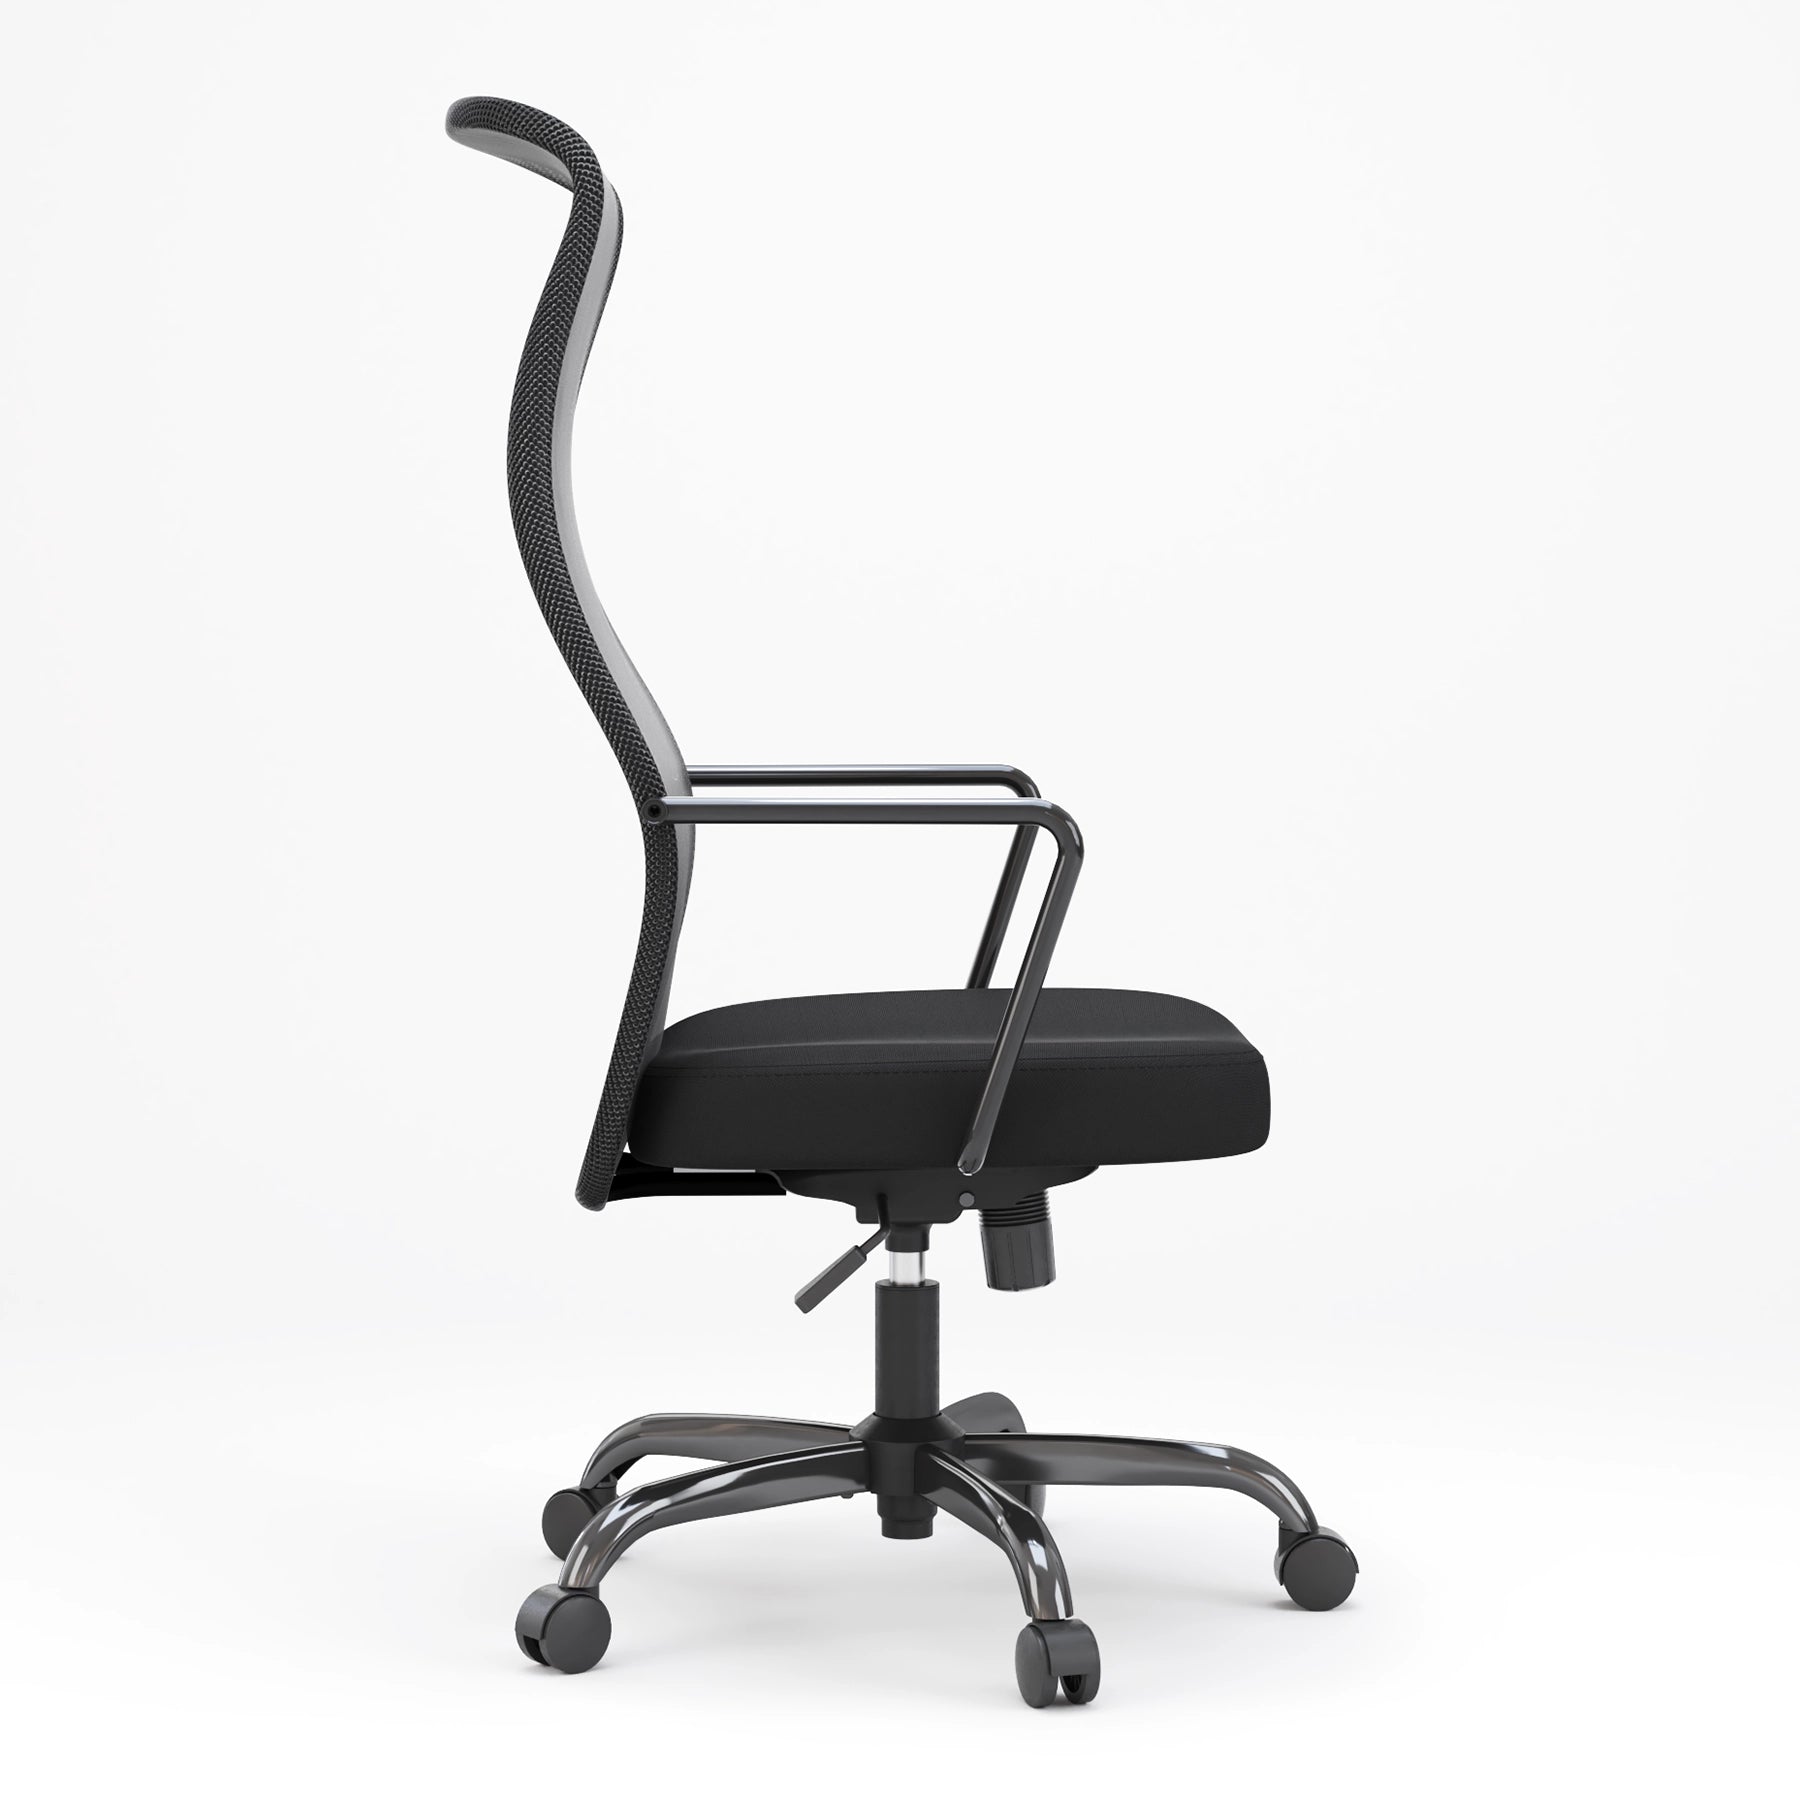 Sihoo M18 Classic Office Chair With Triple Spinal Relief - Coupon Codes,  Promo Codes, Daily Deals, Save Money Today